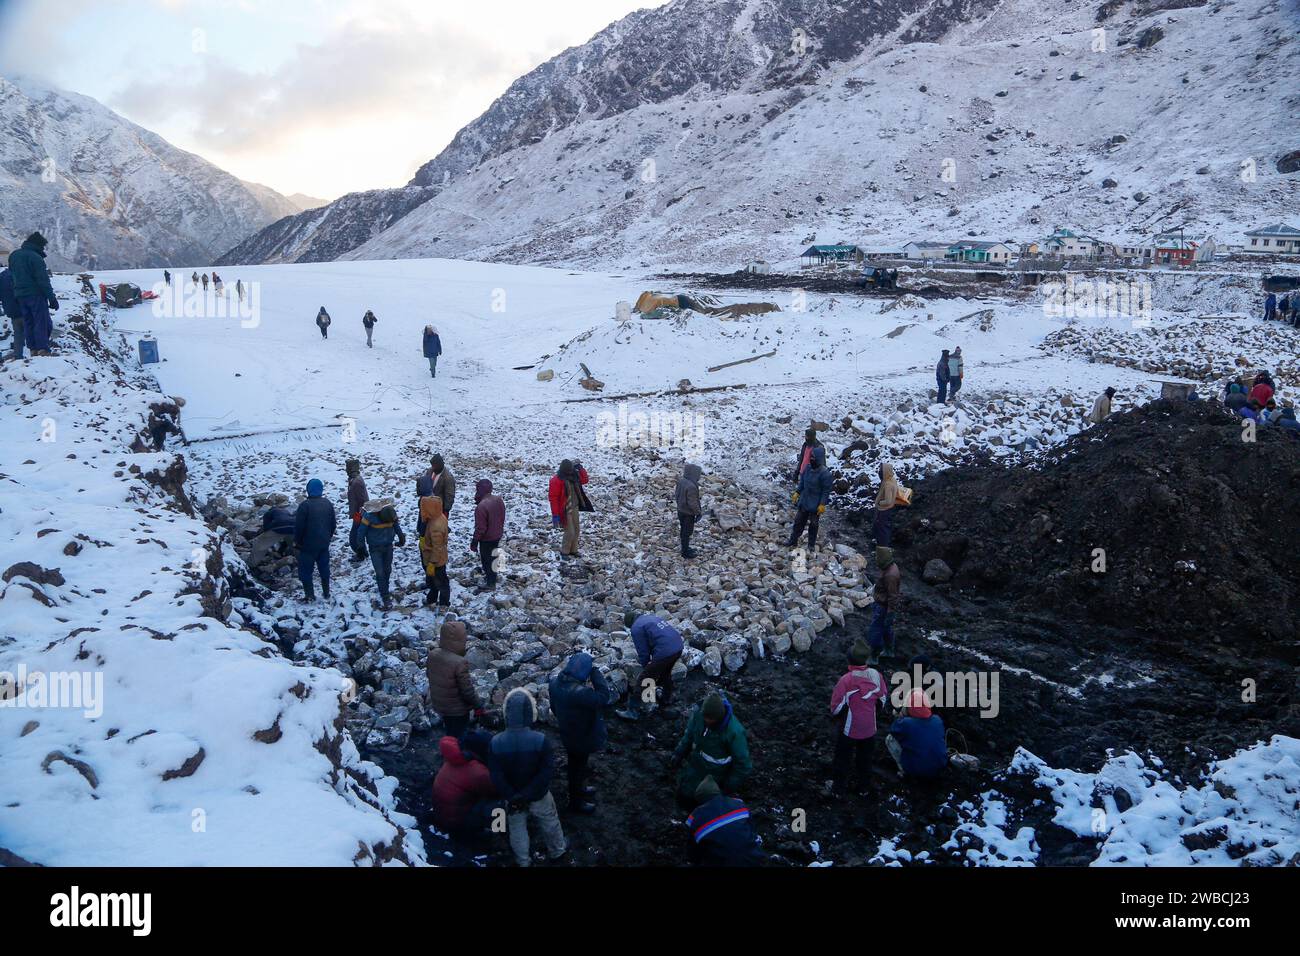 Rudraprayag, Uttarakhand, India, December 12 2014, Kedarnath reconstruction after disaster in extreme winter and snowfall. Government made a reconstruction plan for the Kedarnath temple area that was damaged in floods of 2013. Stock Photo